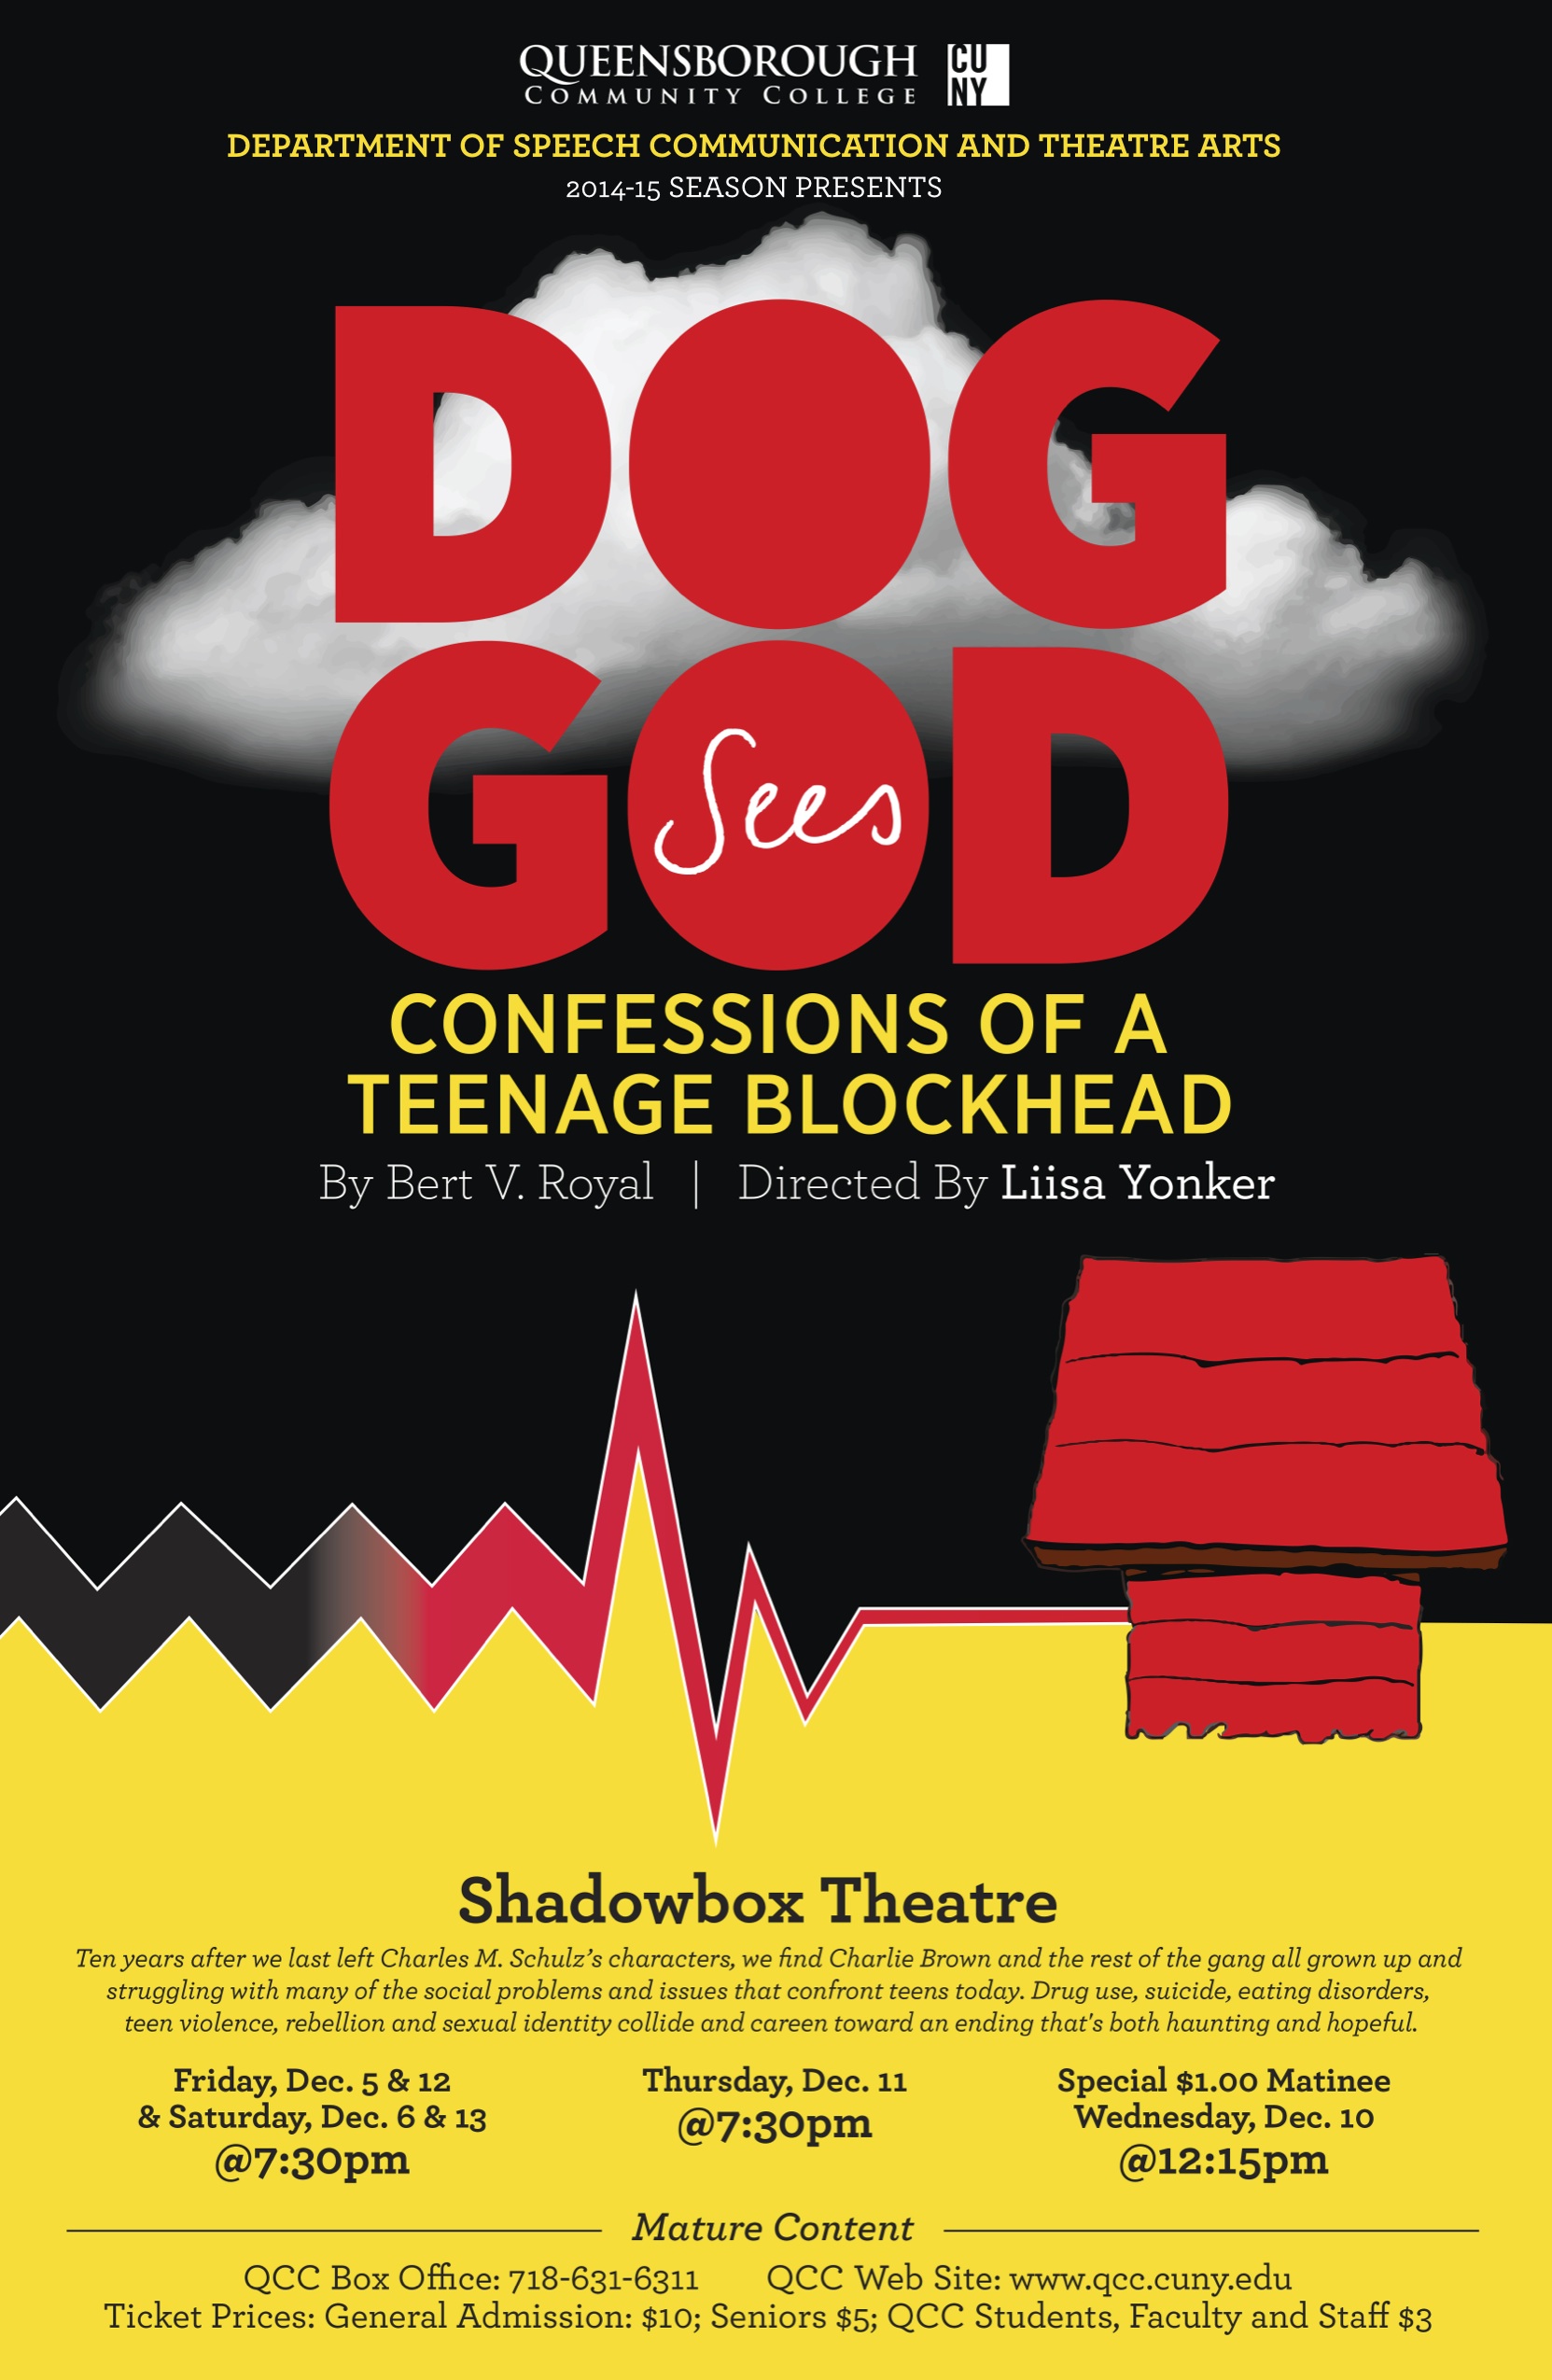 This is a poster for the past fall 2014 production of ‘Dog Sees God: Confessions of a Teenage Blockhead’, written by Bert V. Royal, and directed by Professor Yonker. The poster displays a dog house against a black sky and a large cloud above. 